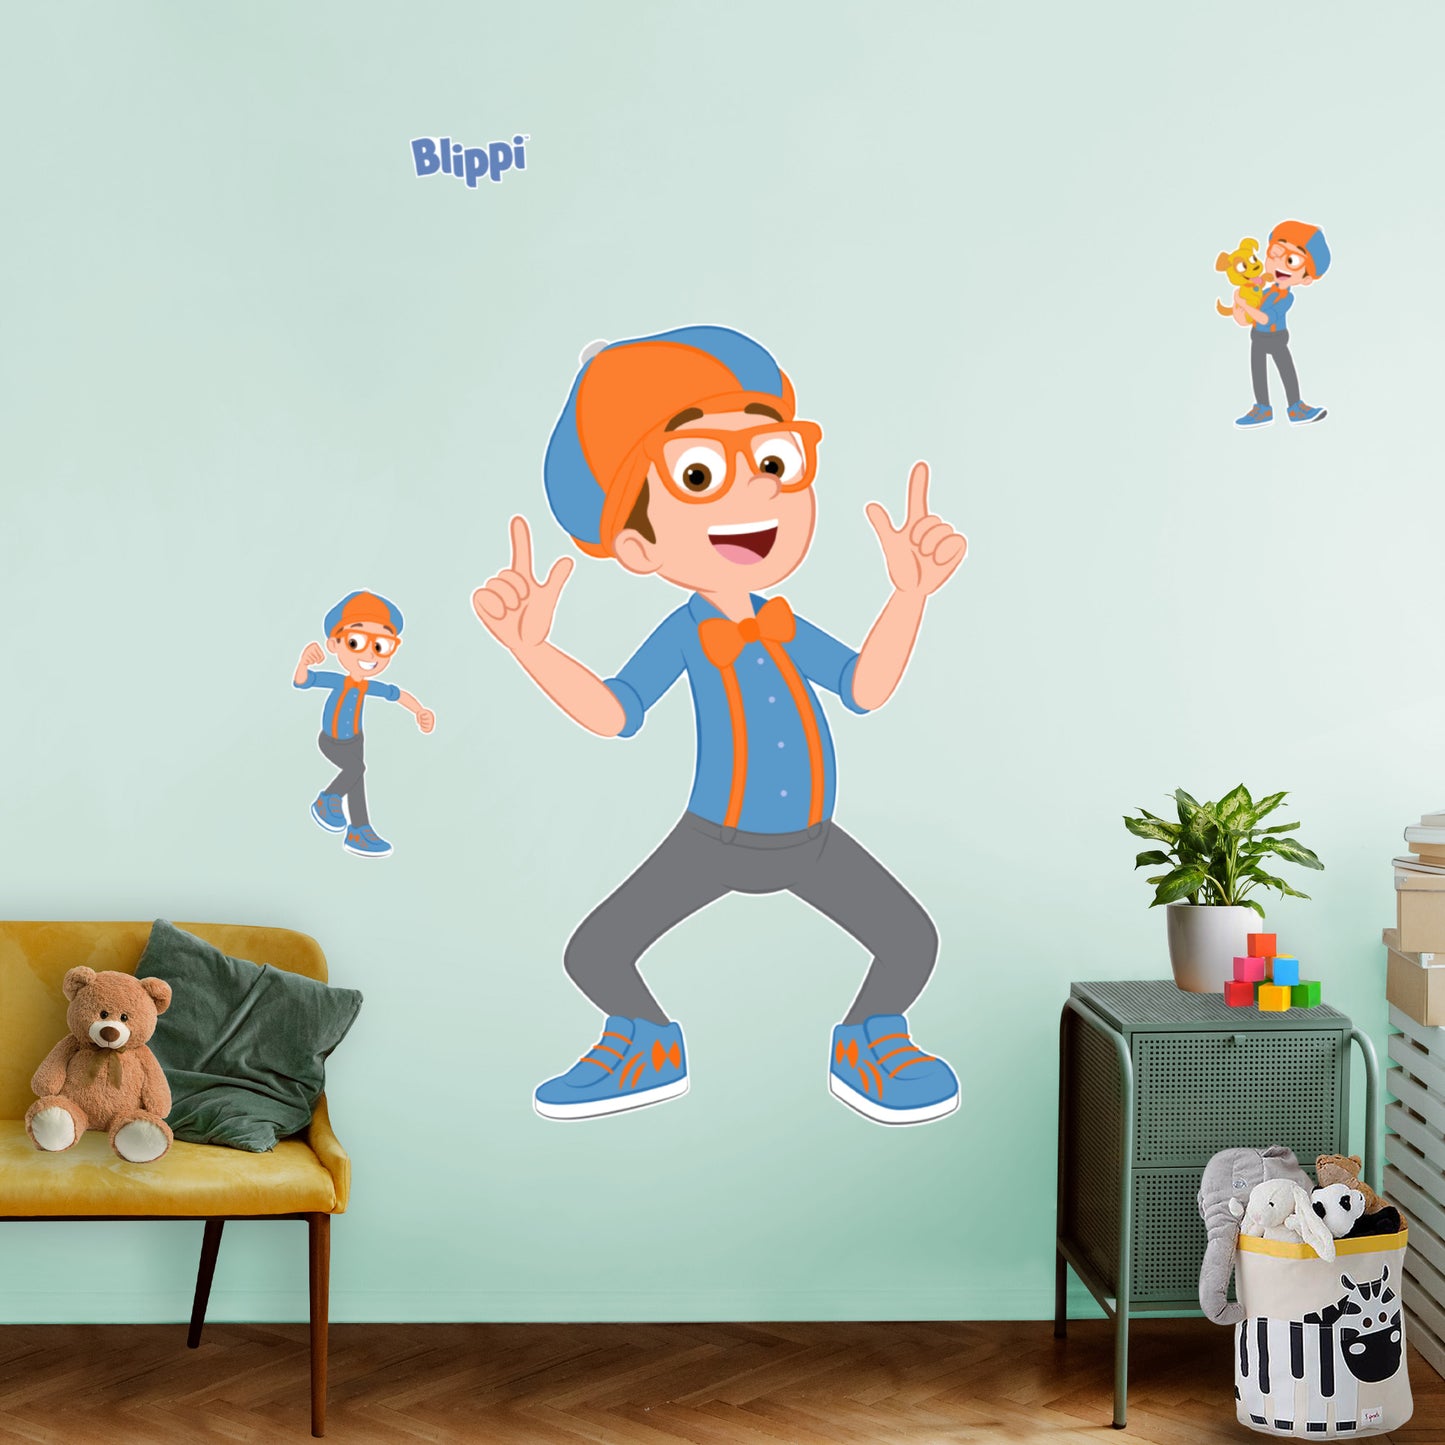 Blippi RealBig        - Officially Licensed Blippi Removable     Adhesive Decal